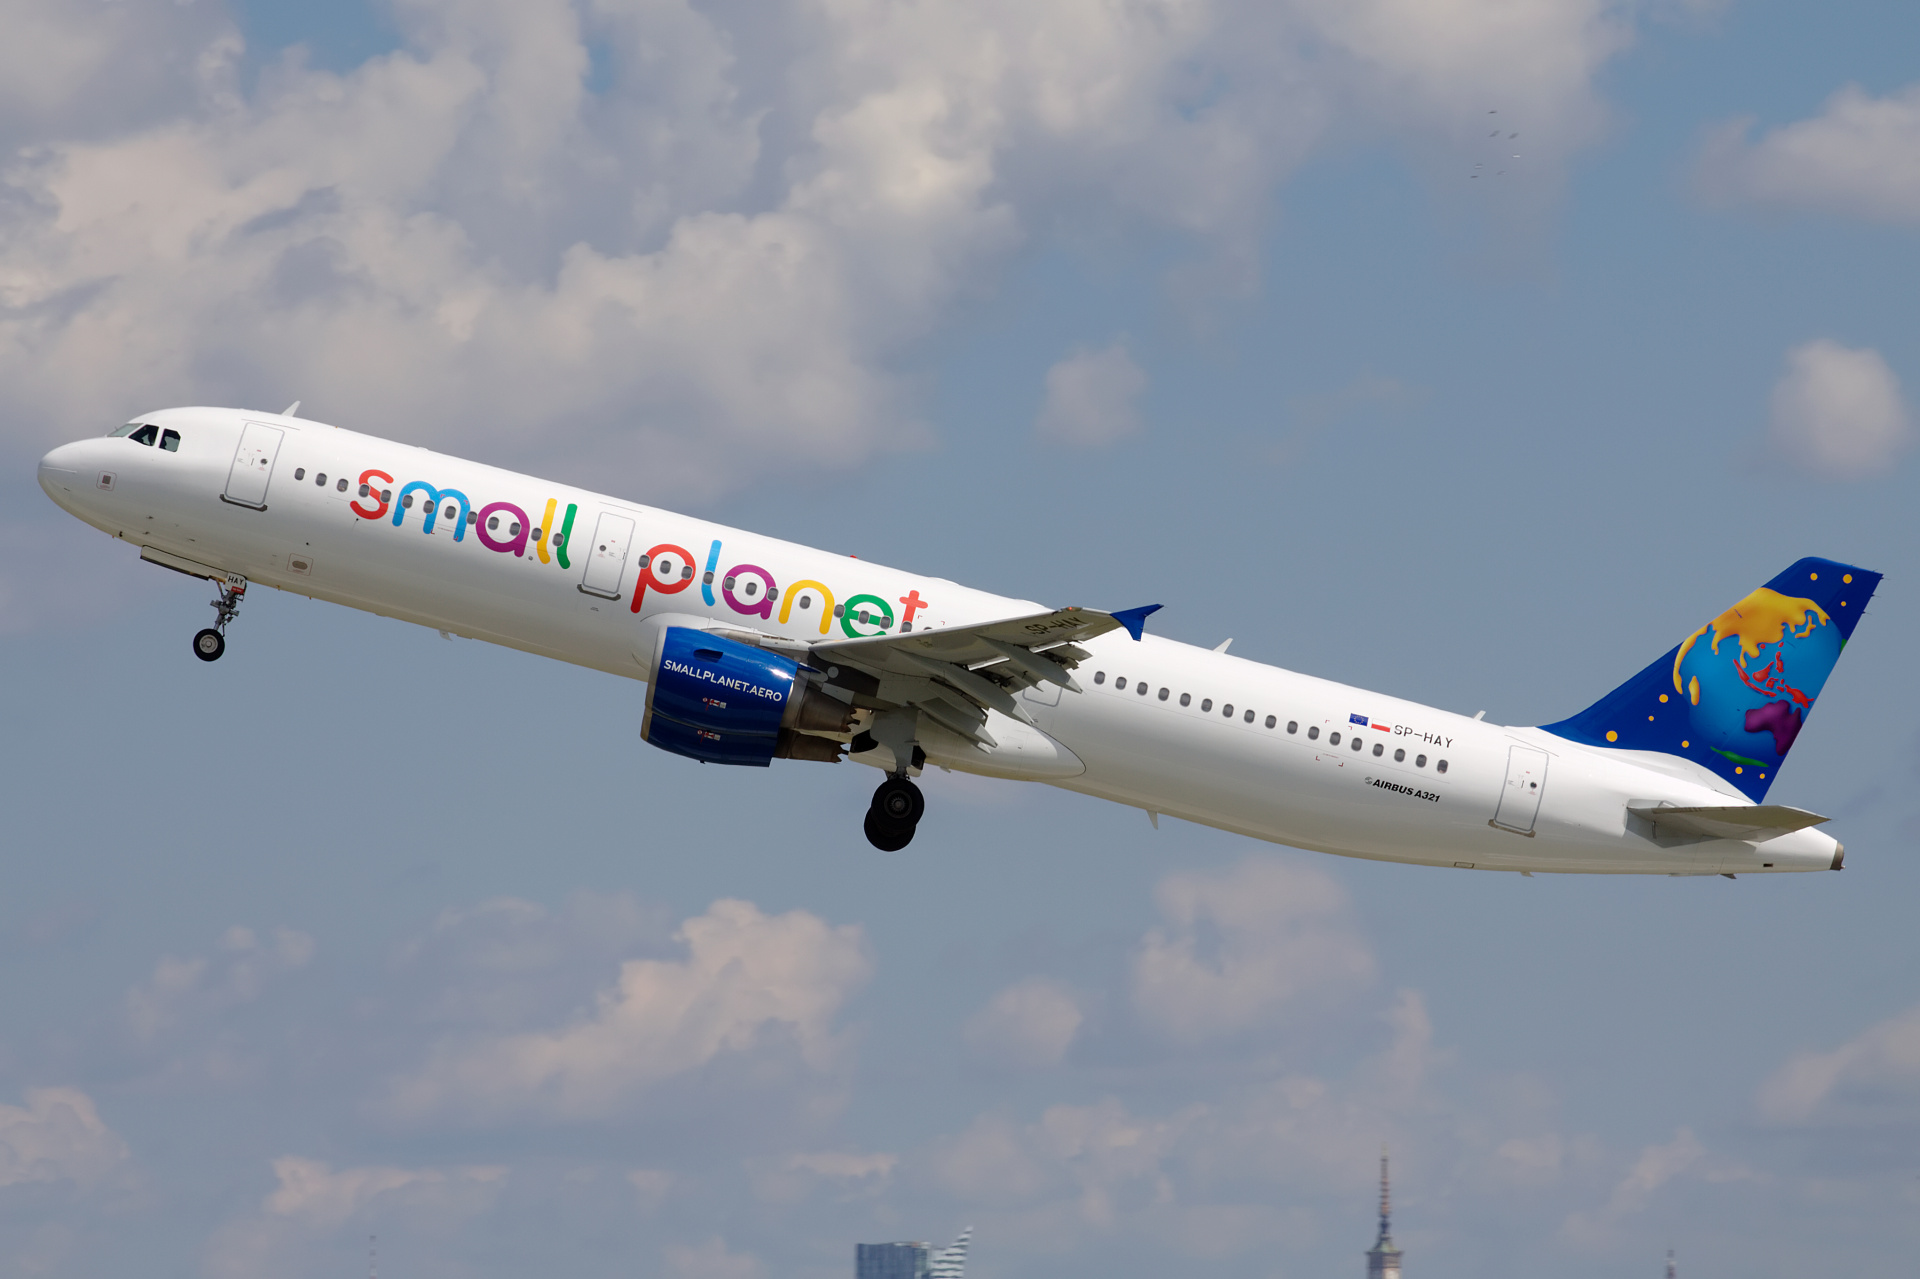 SP-HAY (Aircraft » EPWA Spotting » Airbus A321-200 » Small Planet Airlines Polska)